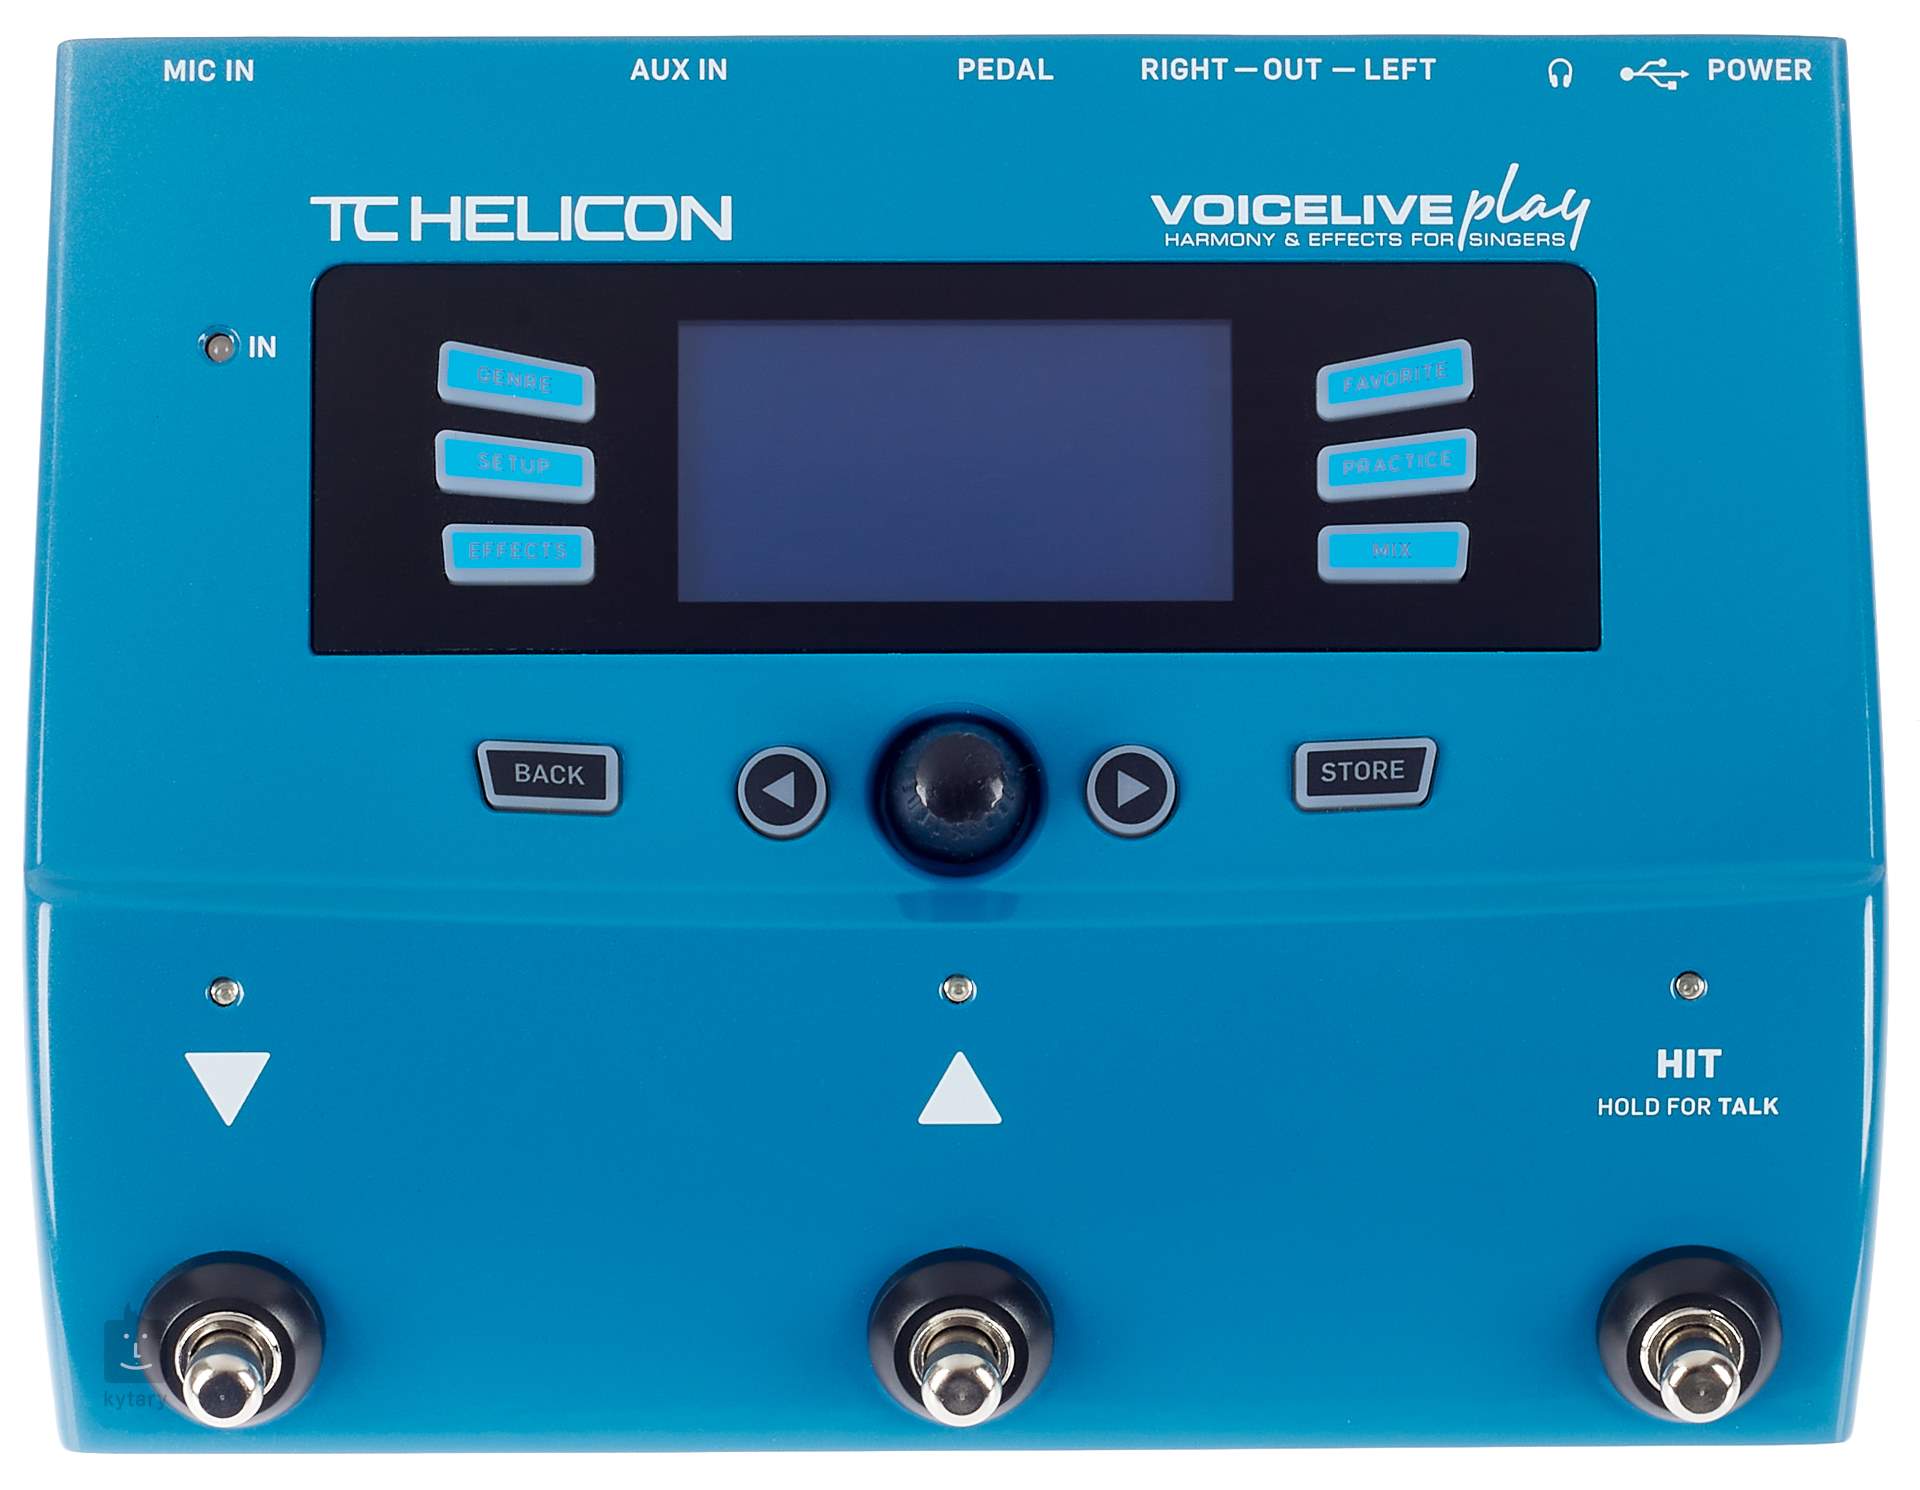 TC HELICON voice live play